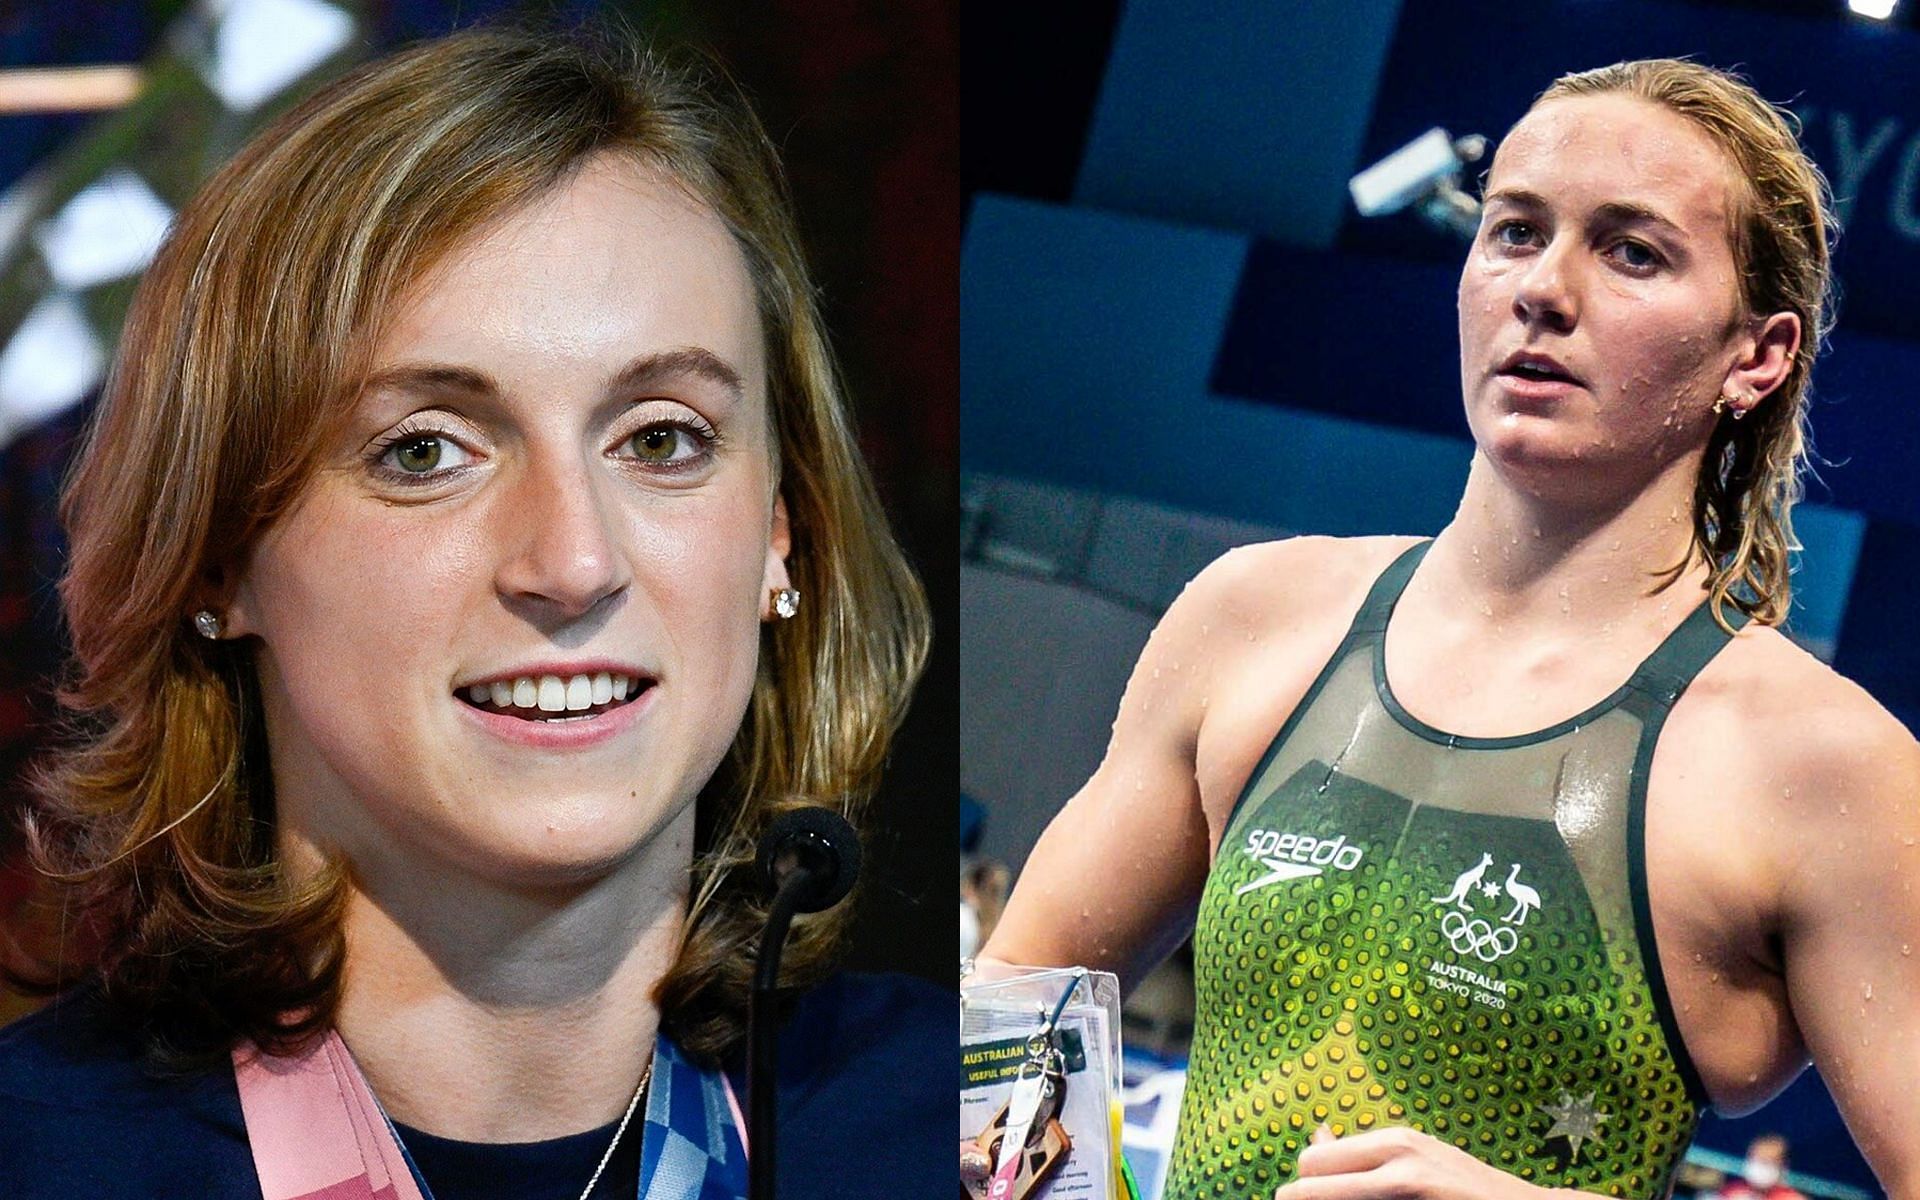 Katie Ledecky and Ariarne Titmus are considered as rivals in the world of competitive swimming (Image via Sportskeeda)